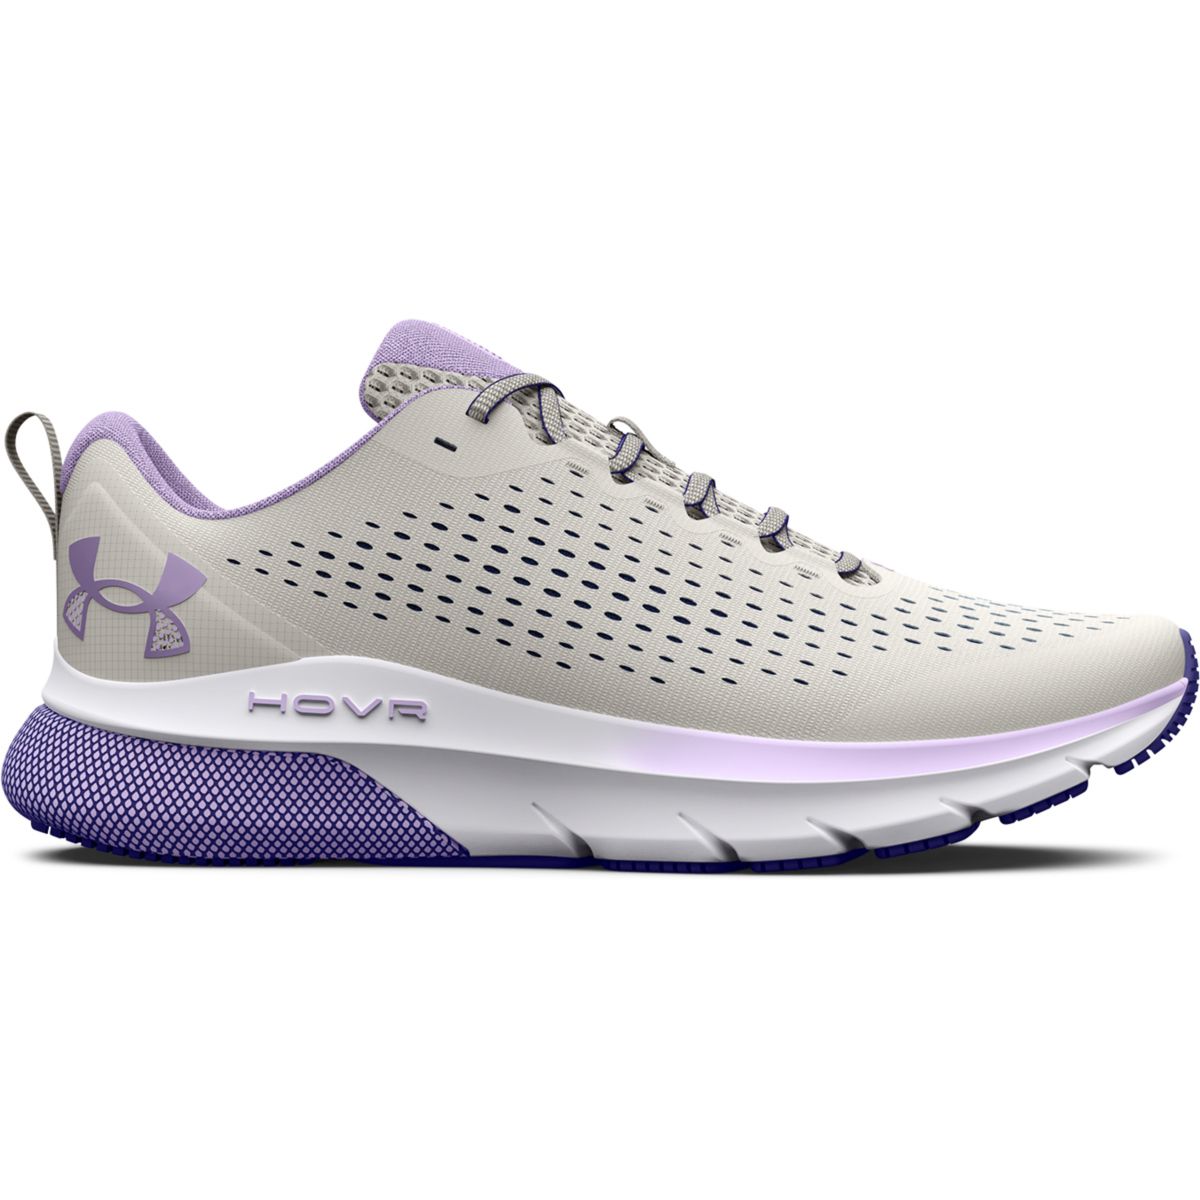 Under Armour HOVR Turbulence Women's Running Shoes 3025425-1